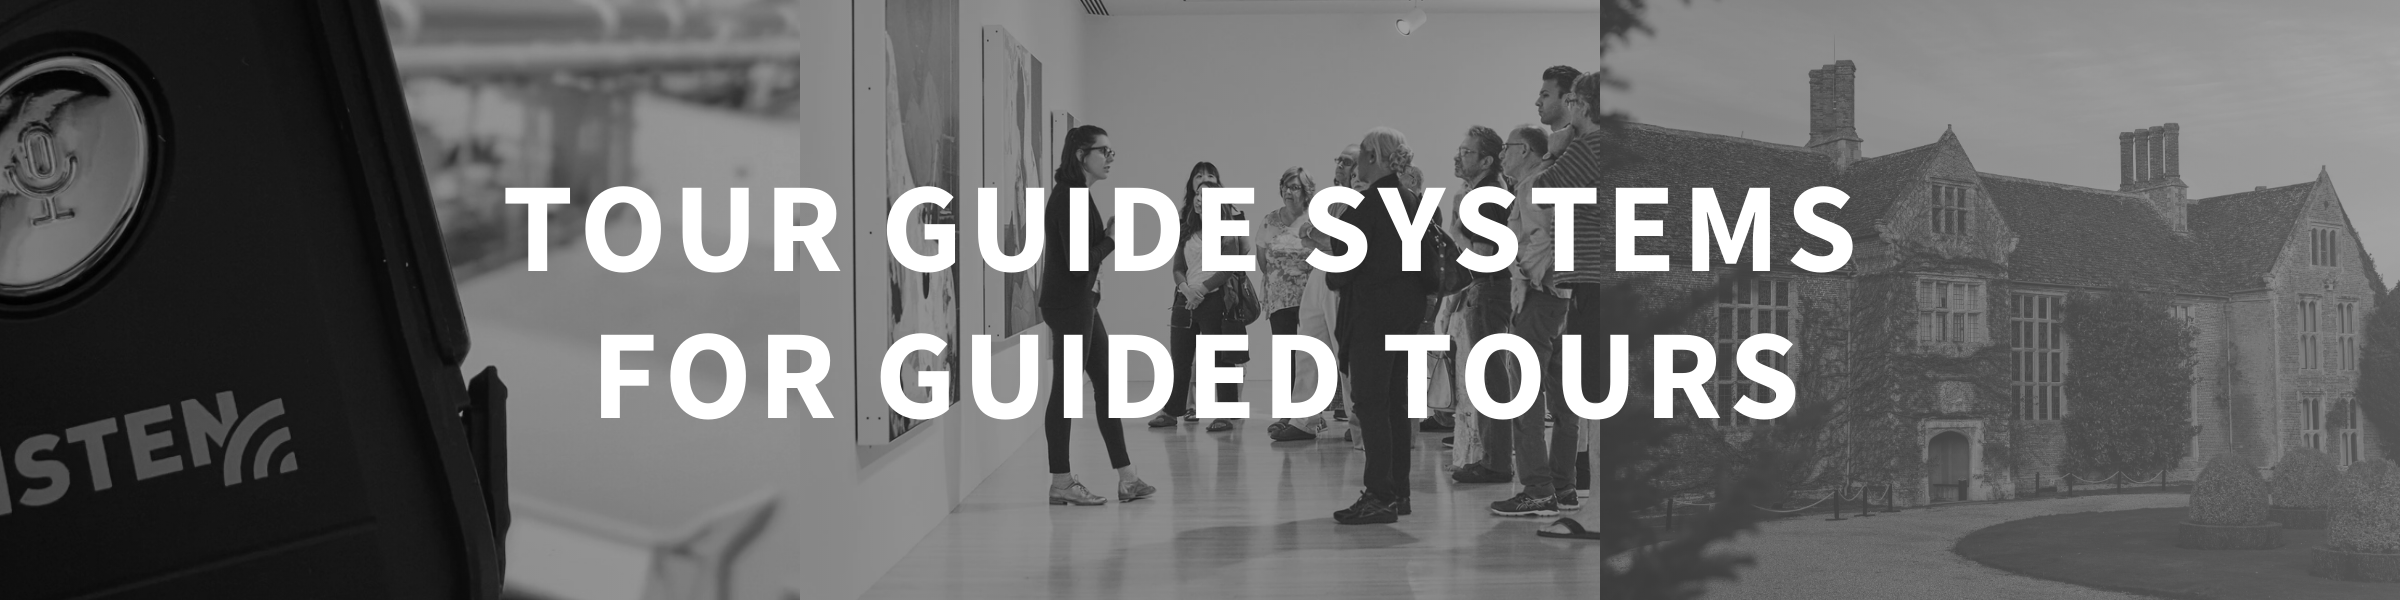 Tour Guide Systems for Guided Tours